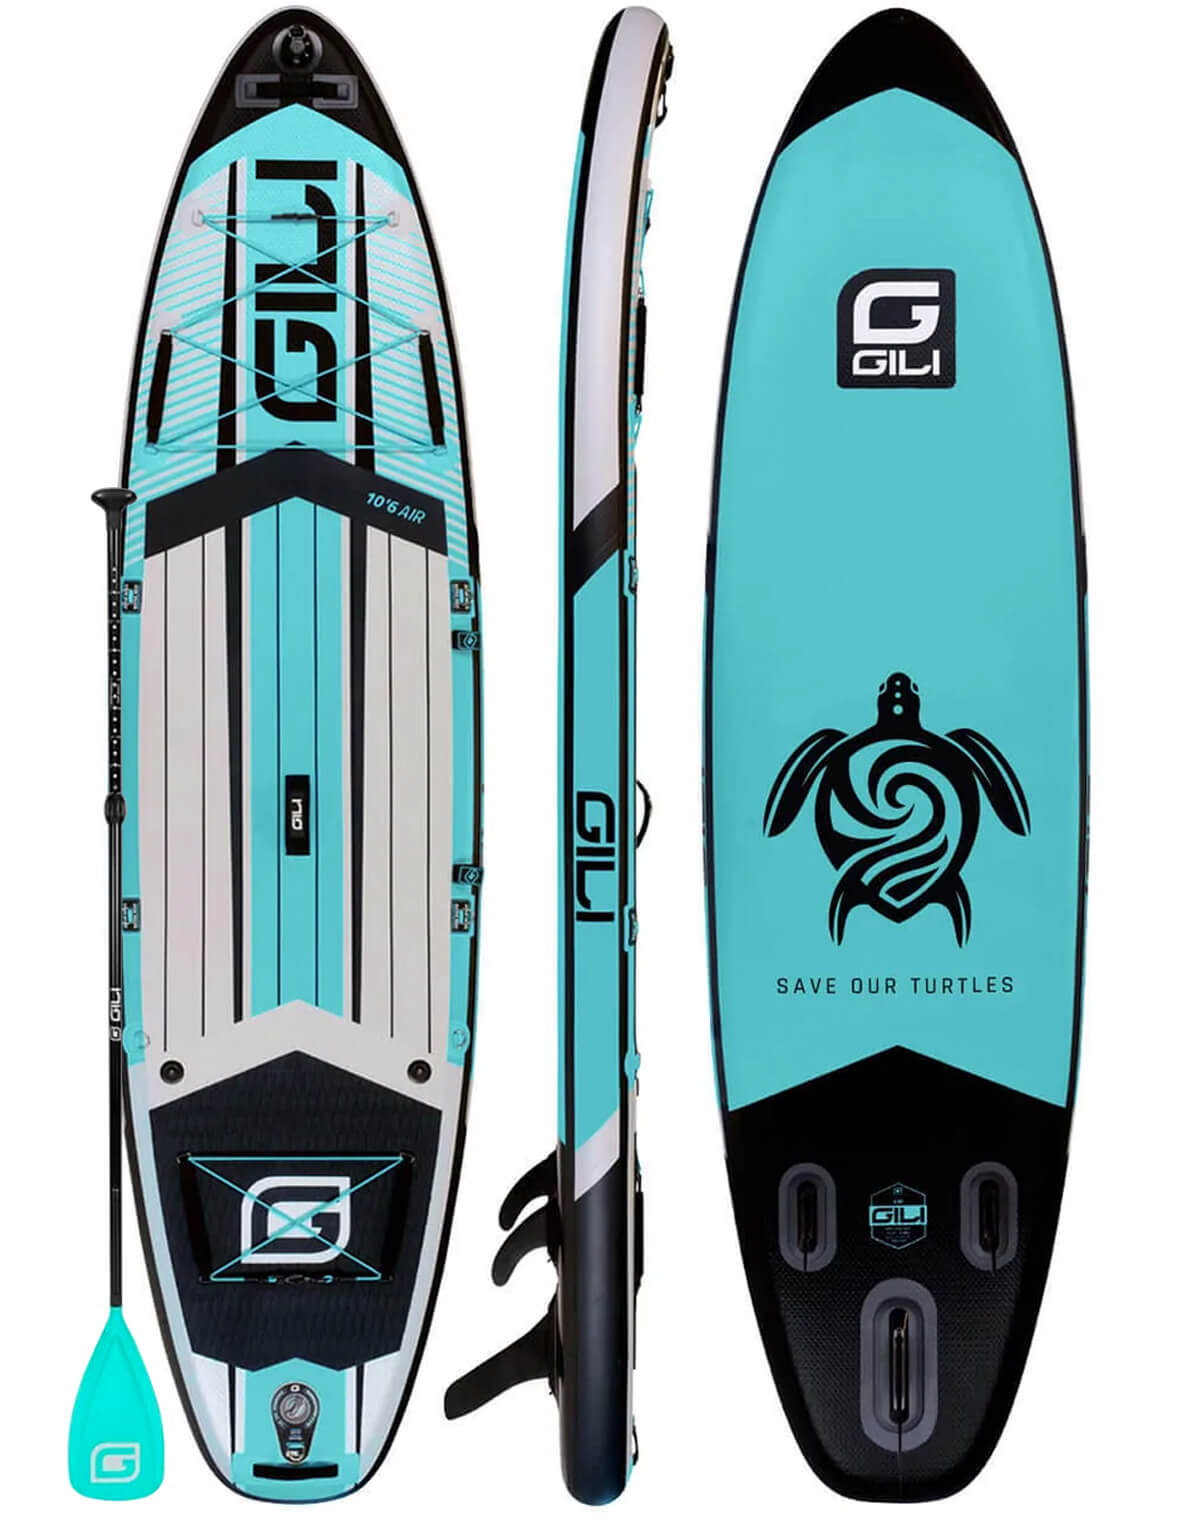 GILI 10'6 AIR Teal Inflatable Paddle Board Save The Turtles